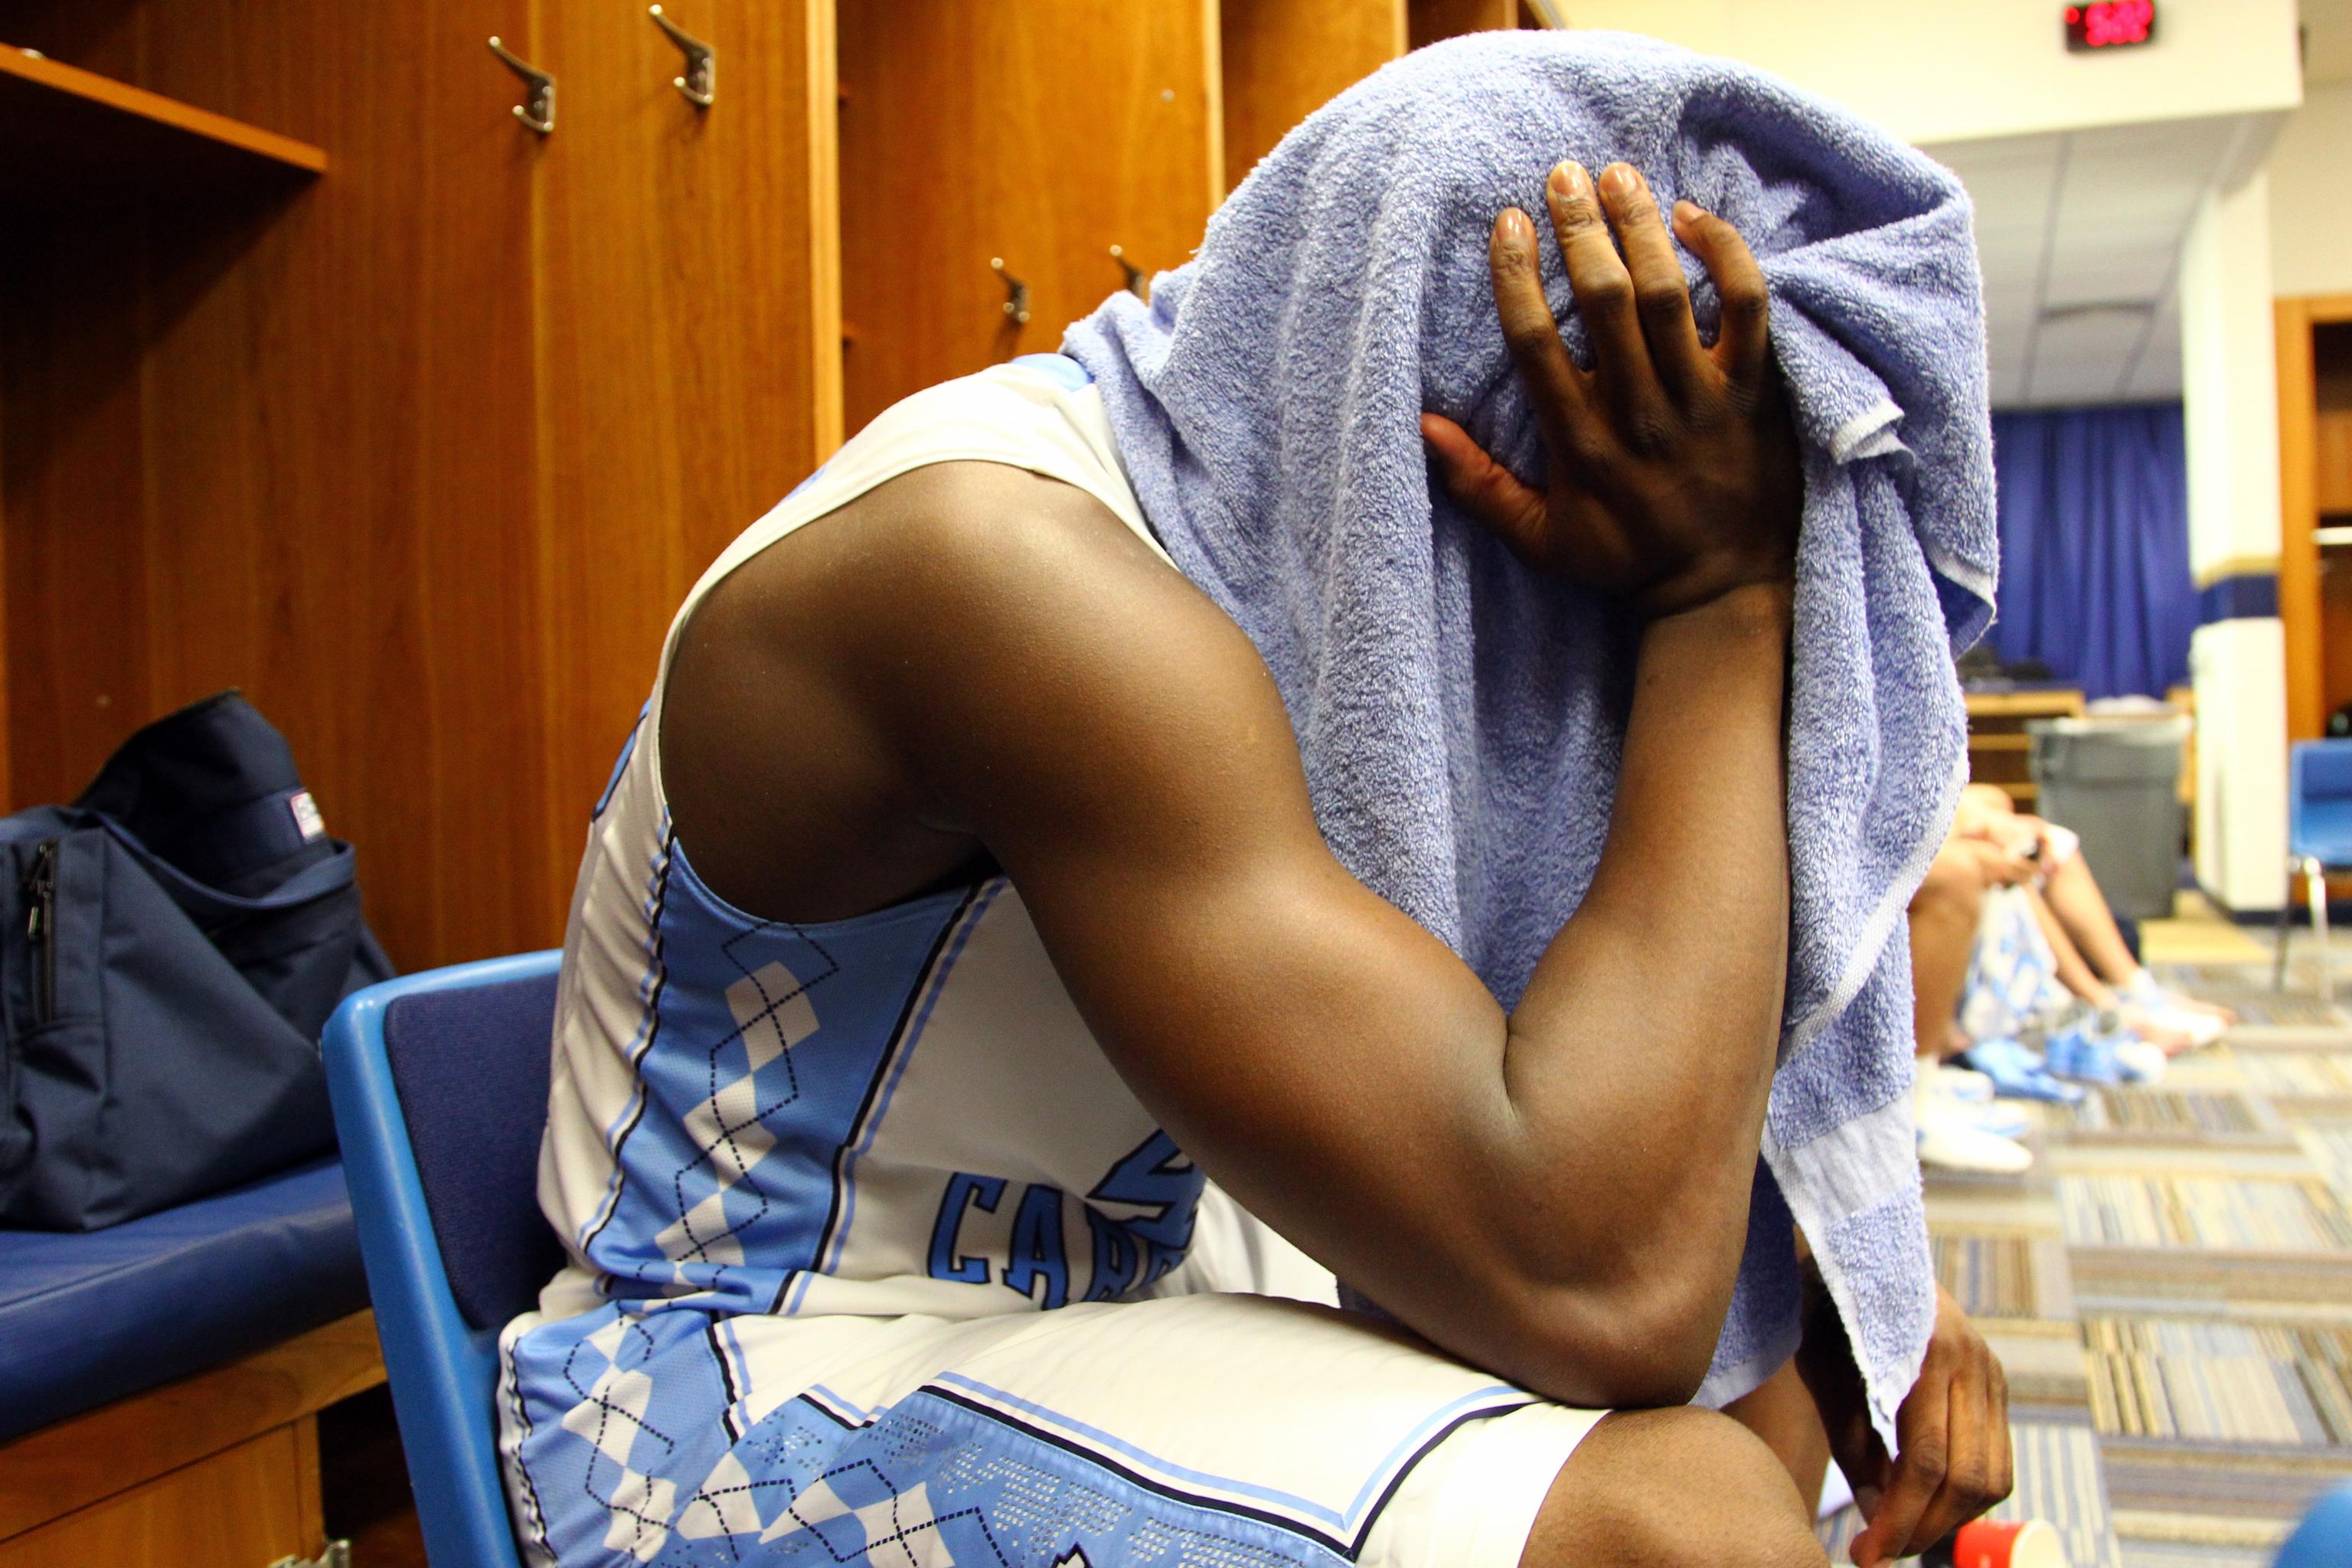 Harrison Barnes Believes UNC Would Have Won Title If Not For Marshall Injury